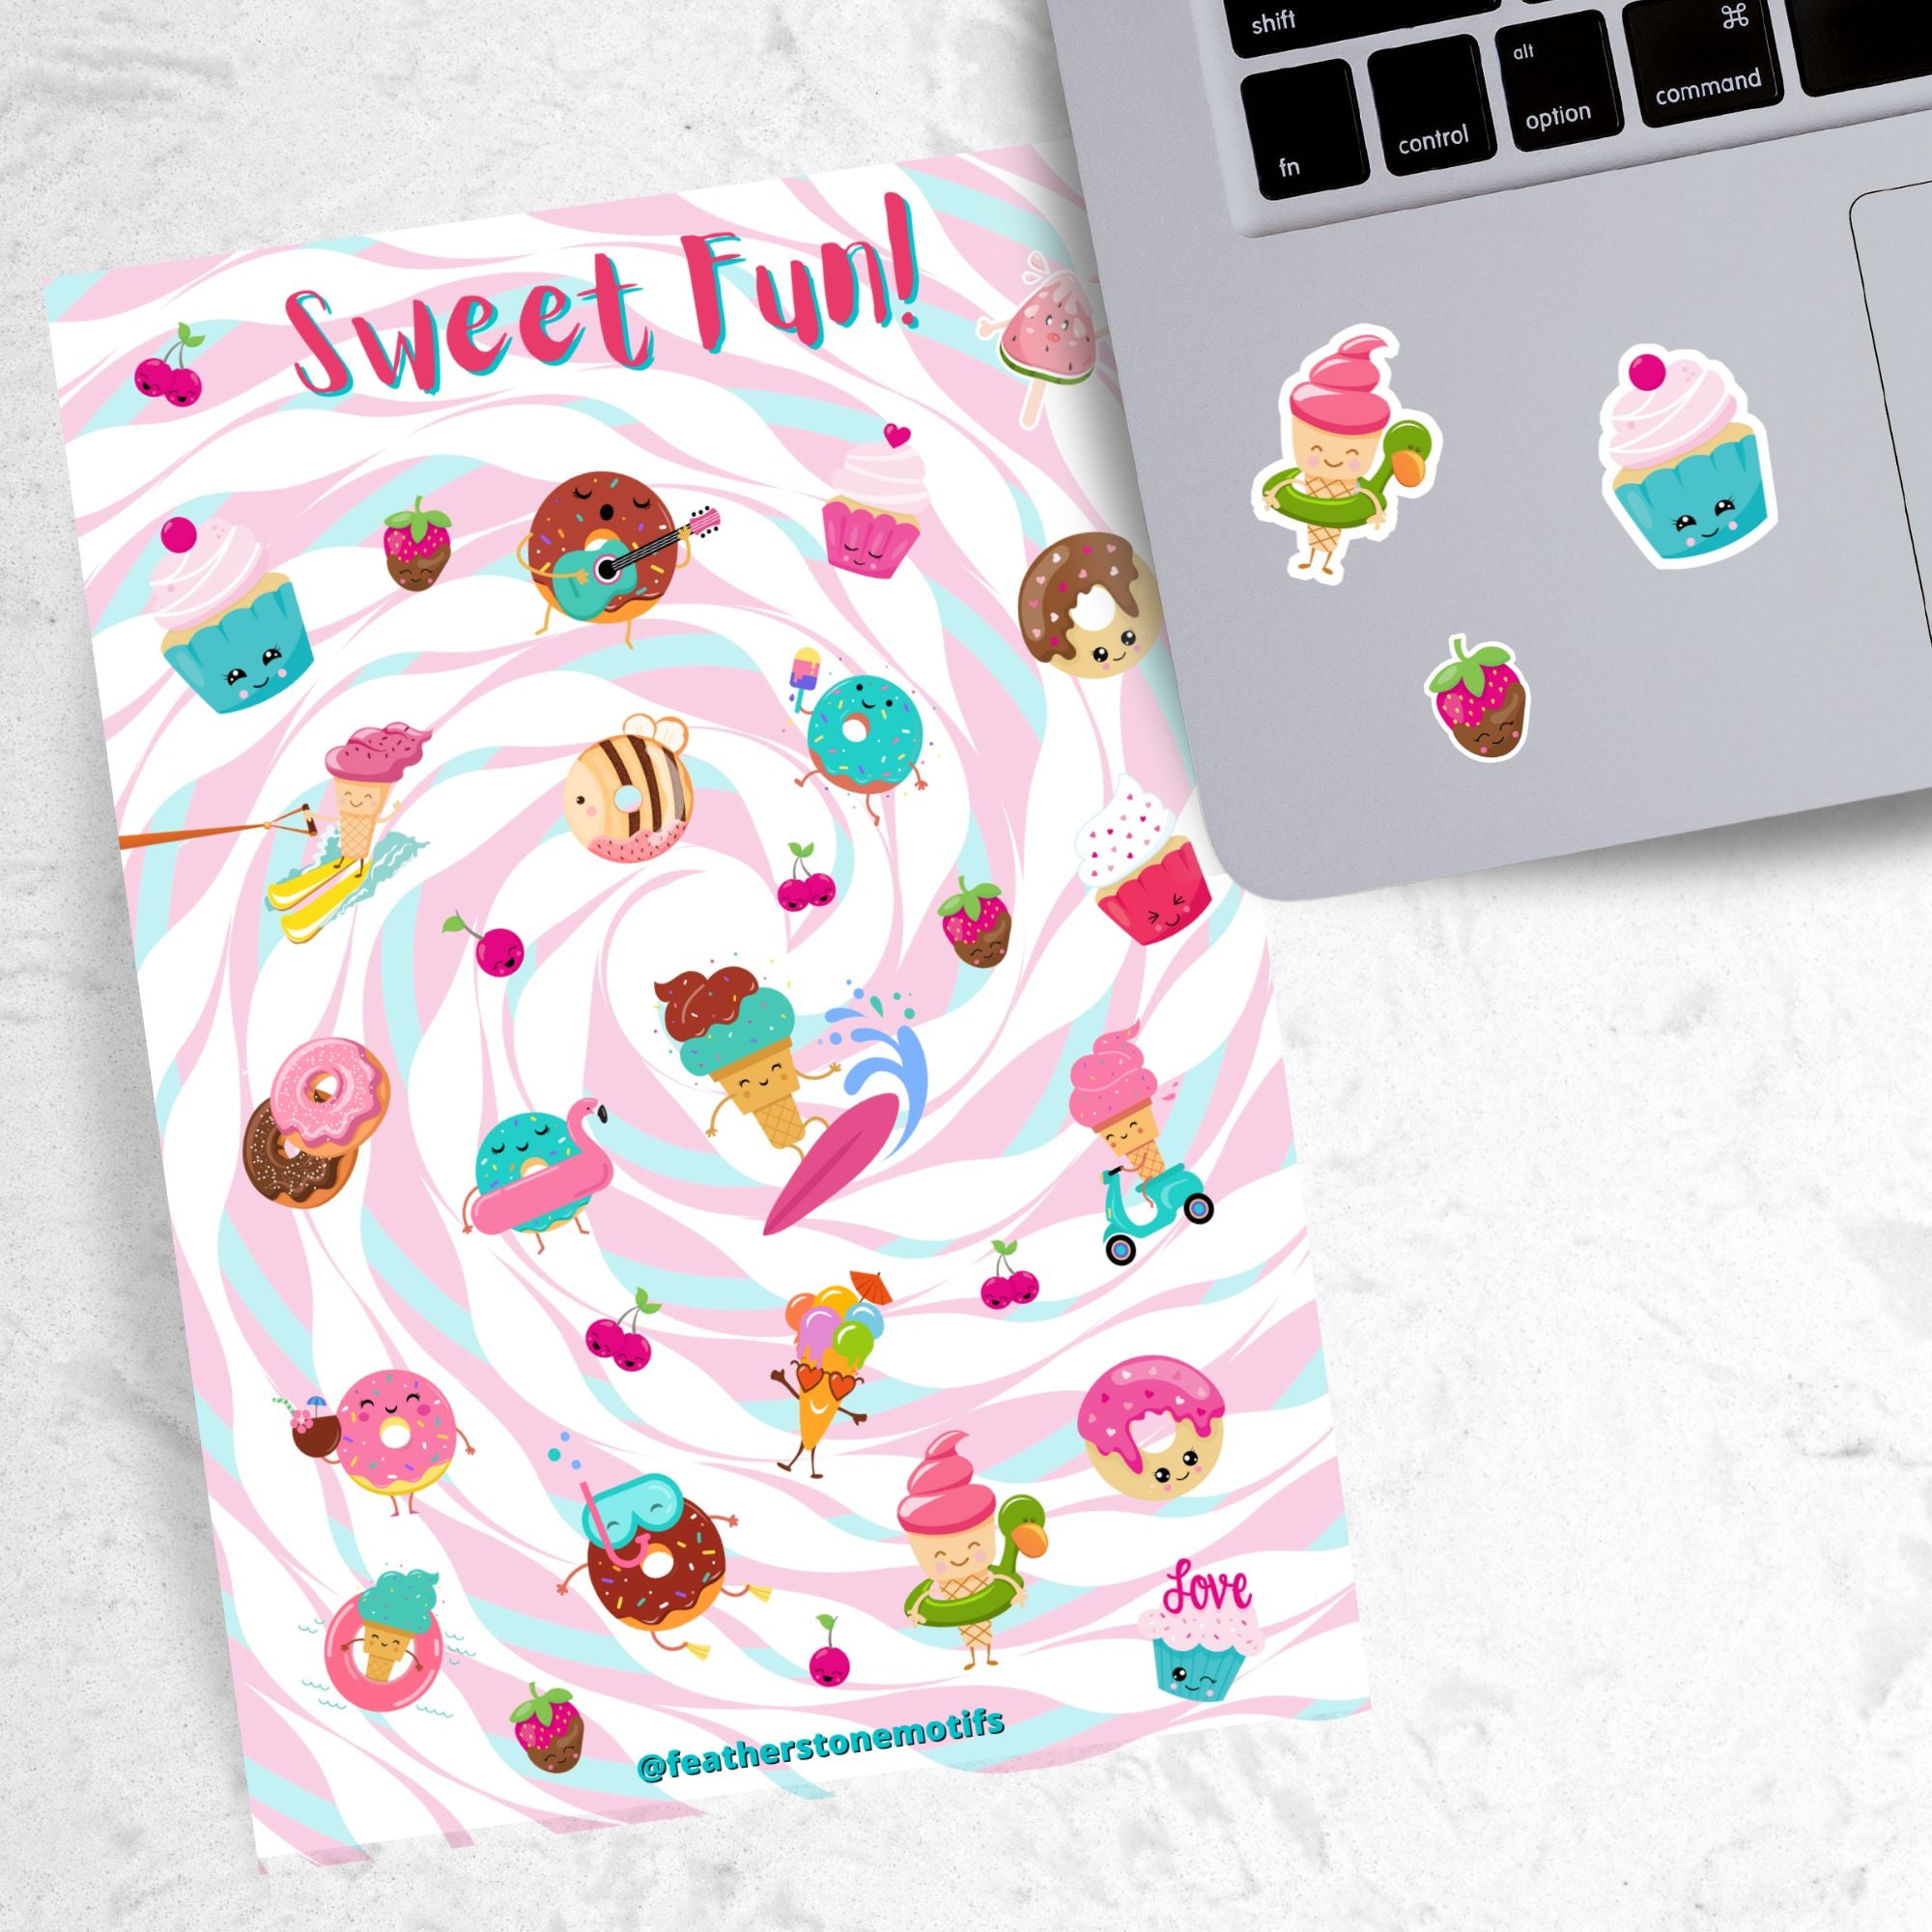 This sticker sheet is such Sweet Fun! It features cartoon characters of all your favorite treats like ice cream, donuts, and cakes. Delicious! This image shows the Sweet Fun sticker sheet next to a laptop with sticker images of an ice cream cone with a water float ring, a smiling cupcake, and a chocolate dipped strawberry applied below the keyboard.